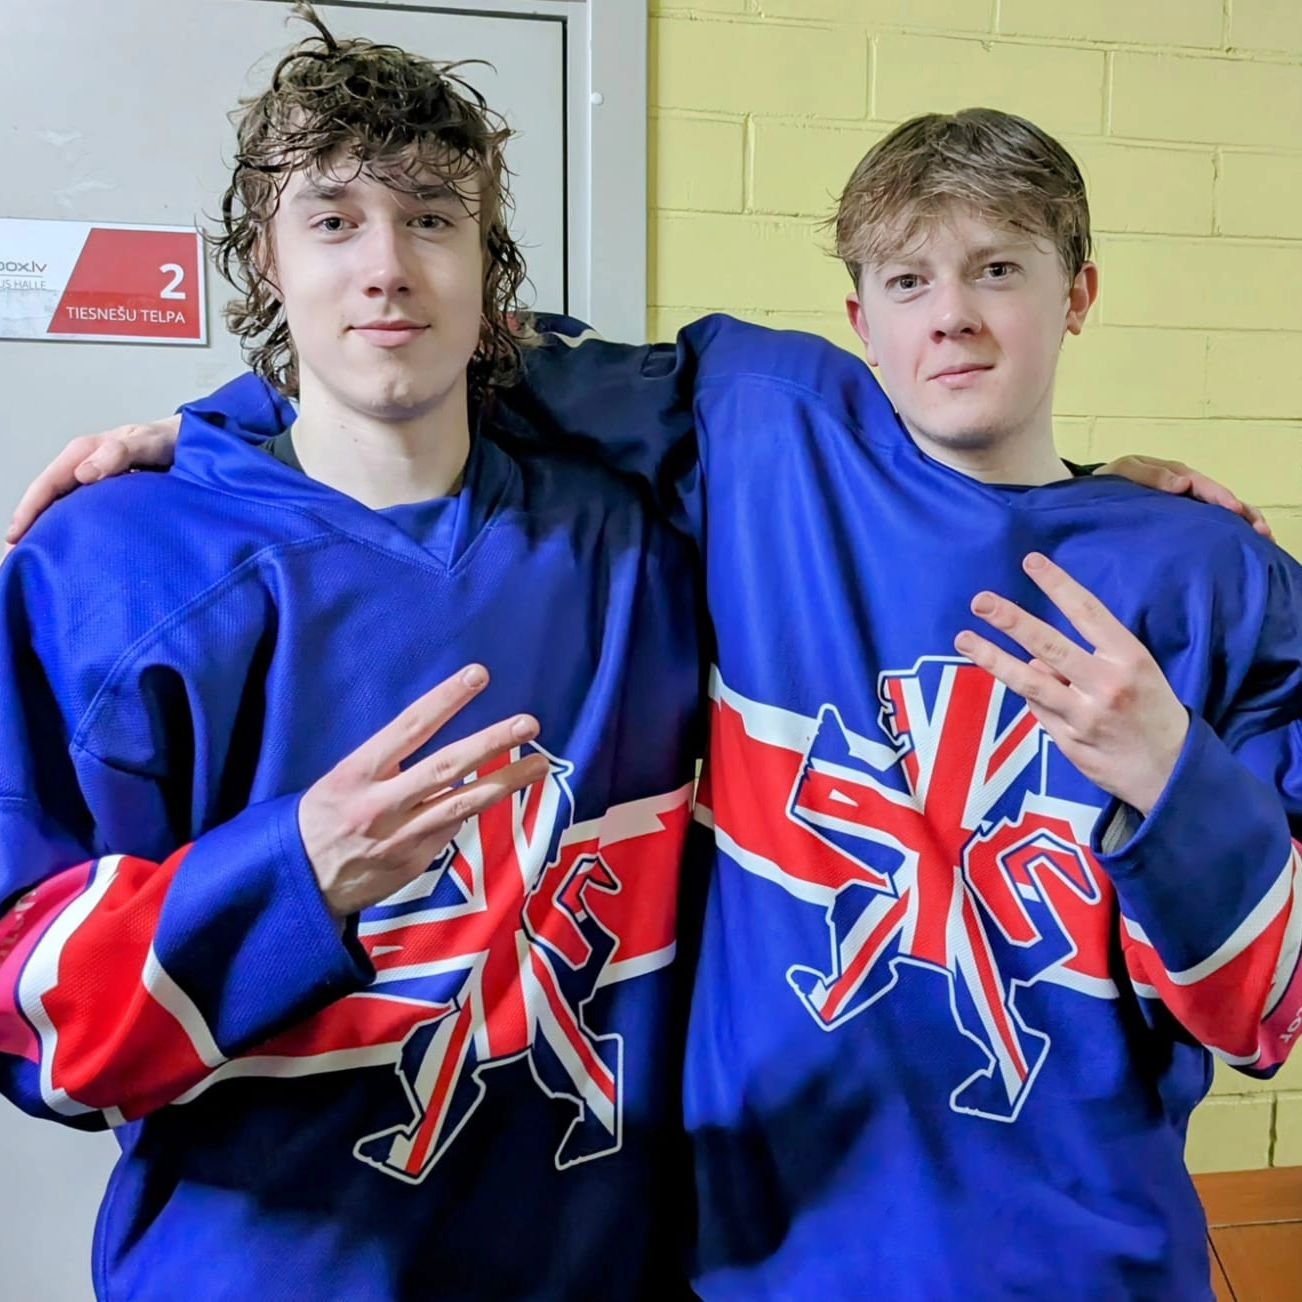 Big congratulations to Bulldogs' forwards duo Daragh and Danny after they and the rest of the @teamgbicehockey  Under-16 team finished third in the @riga_hockey_cup to secure a bronze medal!! 

Both lads excelled and made significant contributions in